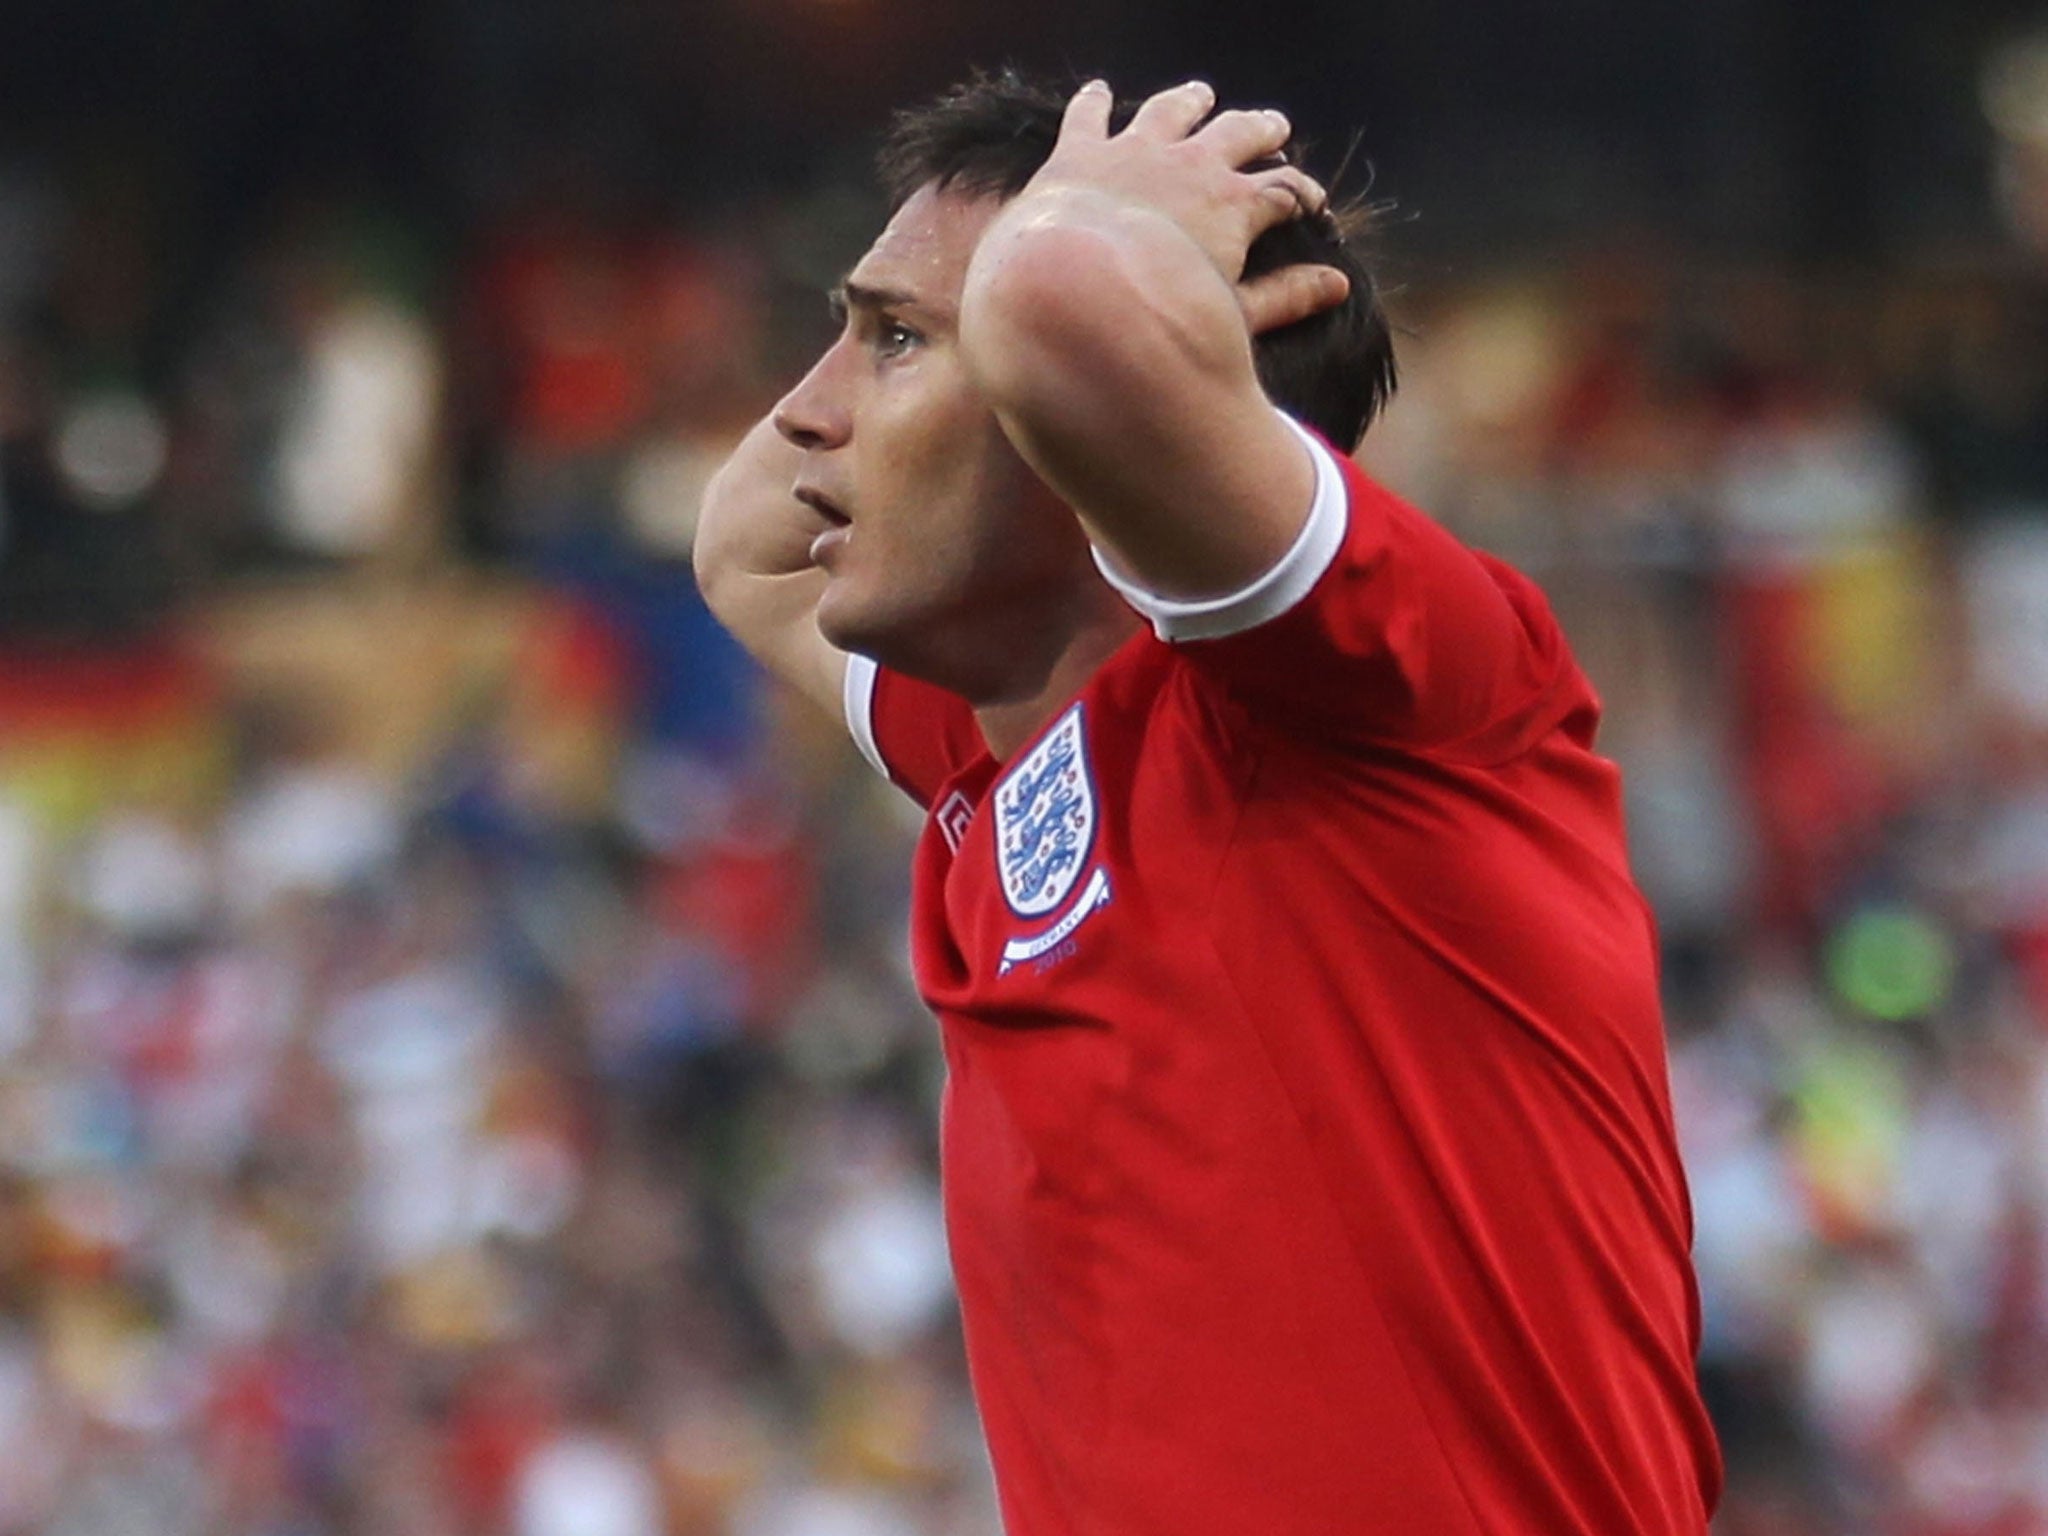 Frank Lampard sees his World Cup goal ruled out